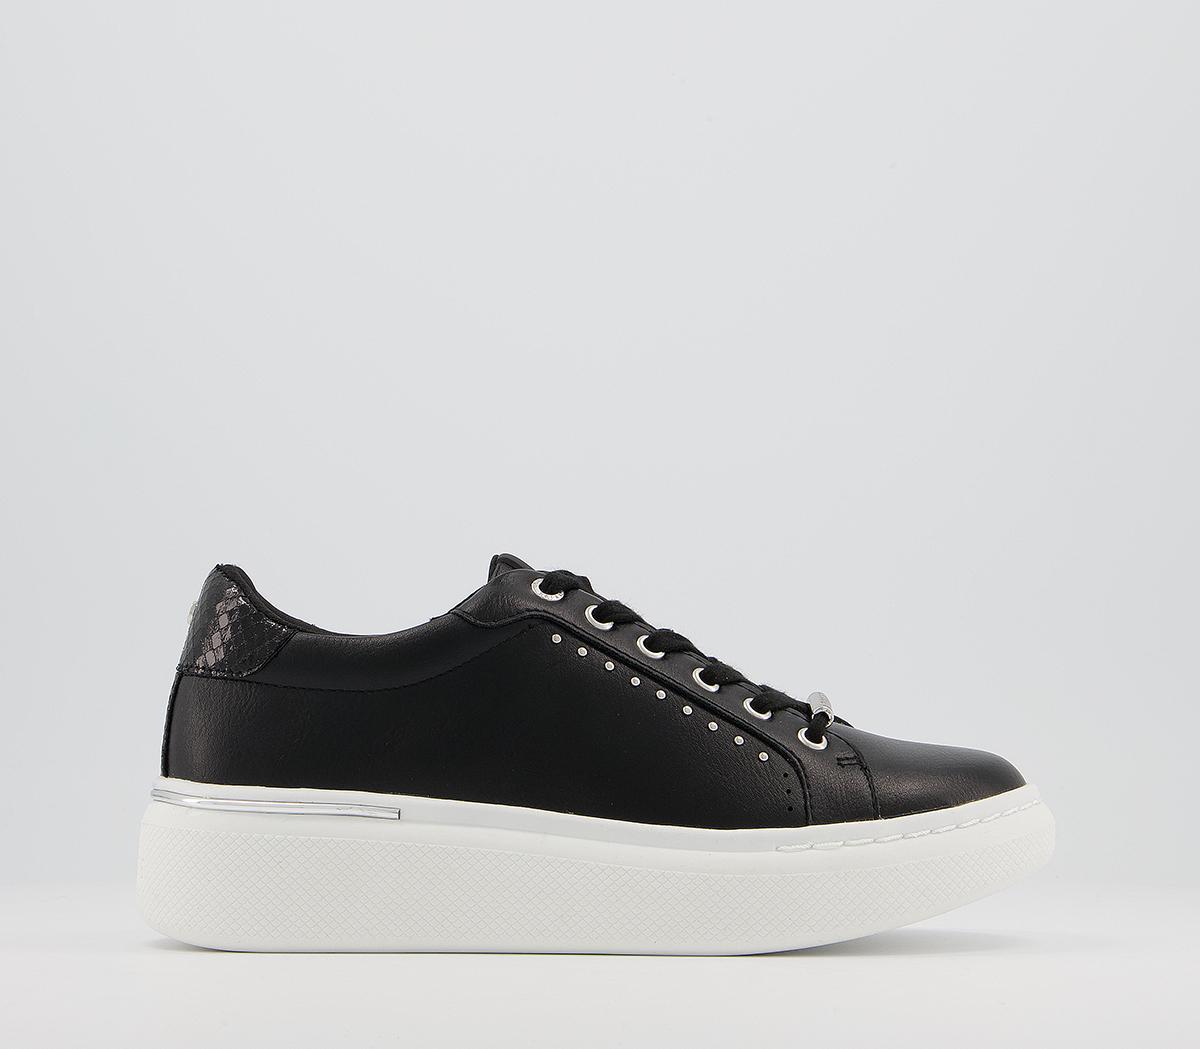 OFFICEFinish Lace Up TrainersBlack With Silver Hardware